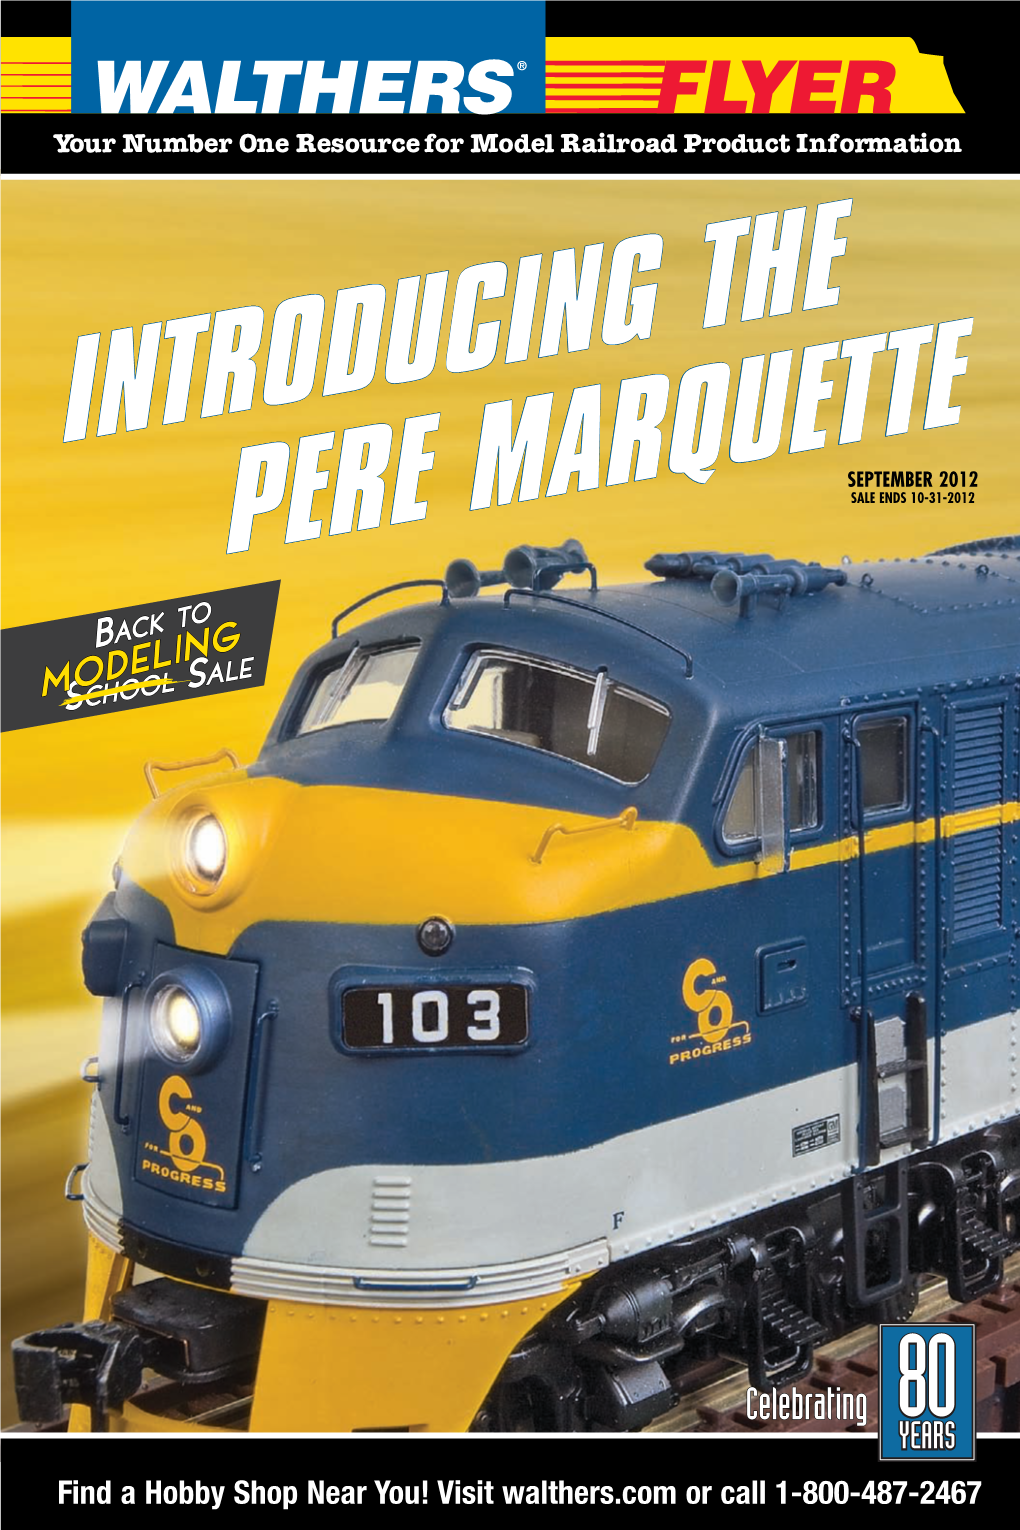 Introducing the Pere Marquette